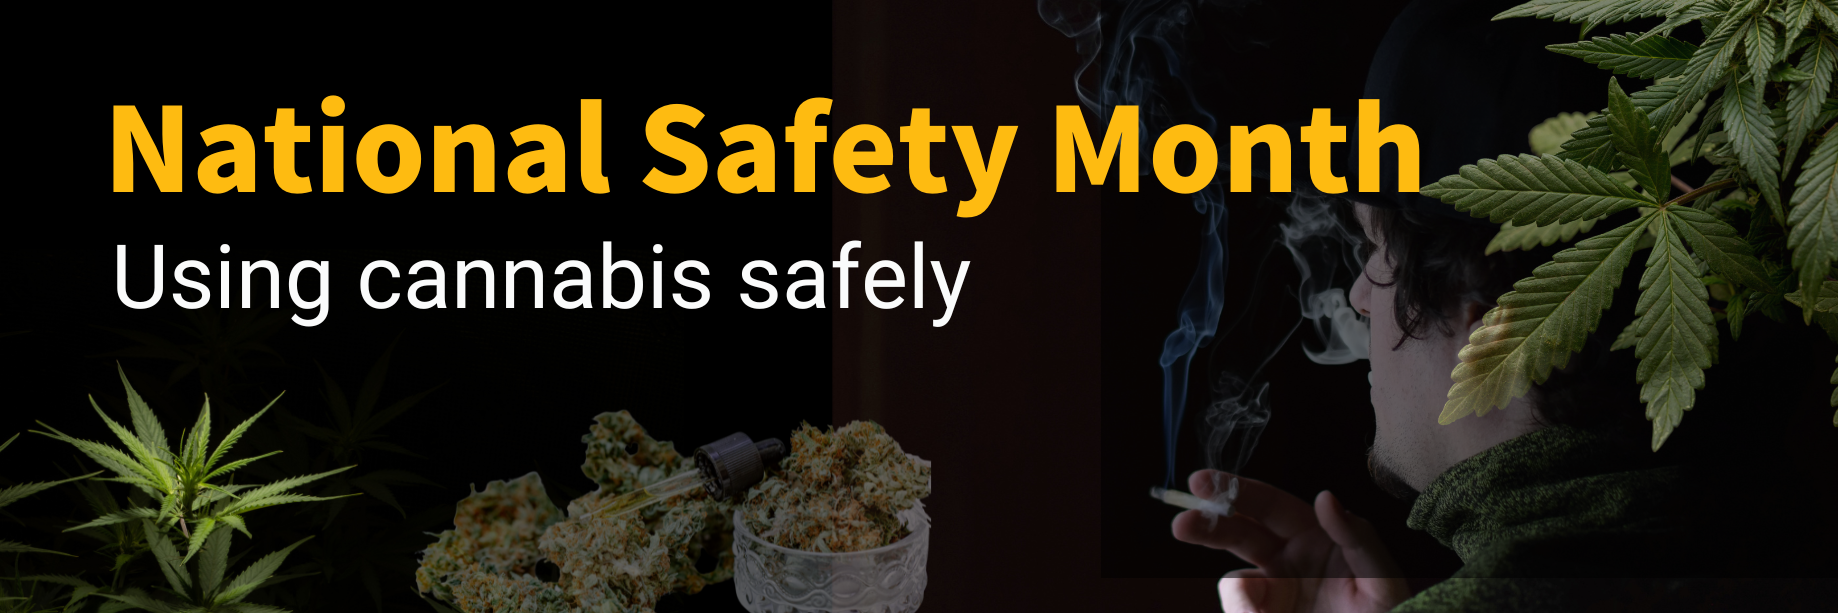 Cannabis safety is always a hot topic at the NJ-CRC. With just a few days left to go in the month, here are some reminders for protecting yourself and others from possible adverse reactions caused by cannabis consumption.